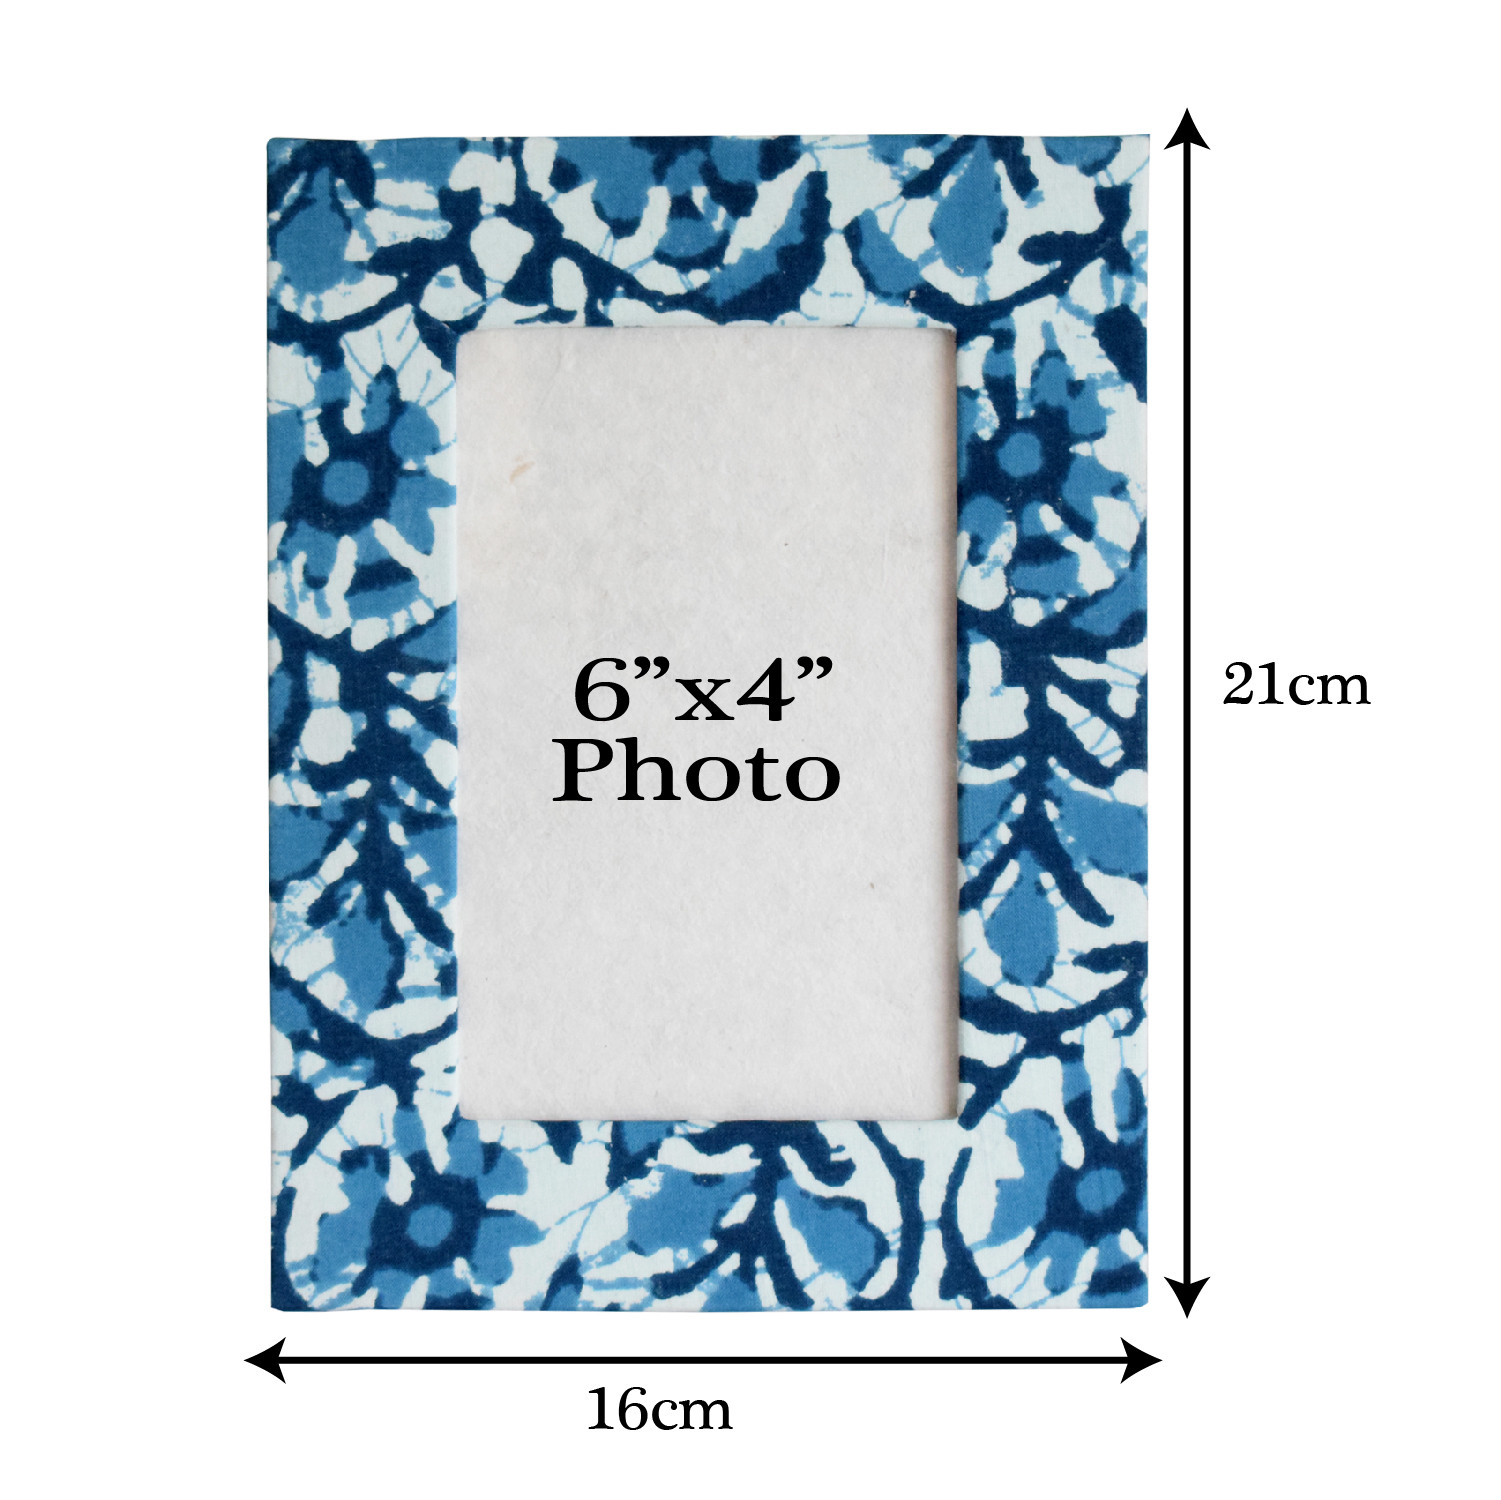 Kuber Industries Army Print Handicrafts Photo Frame For Living Room,Bedroom With Stable Stand (Blue)